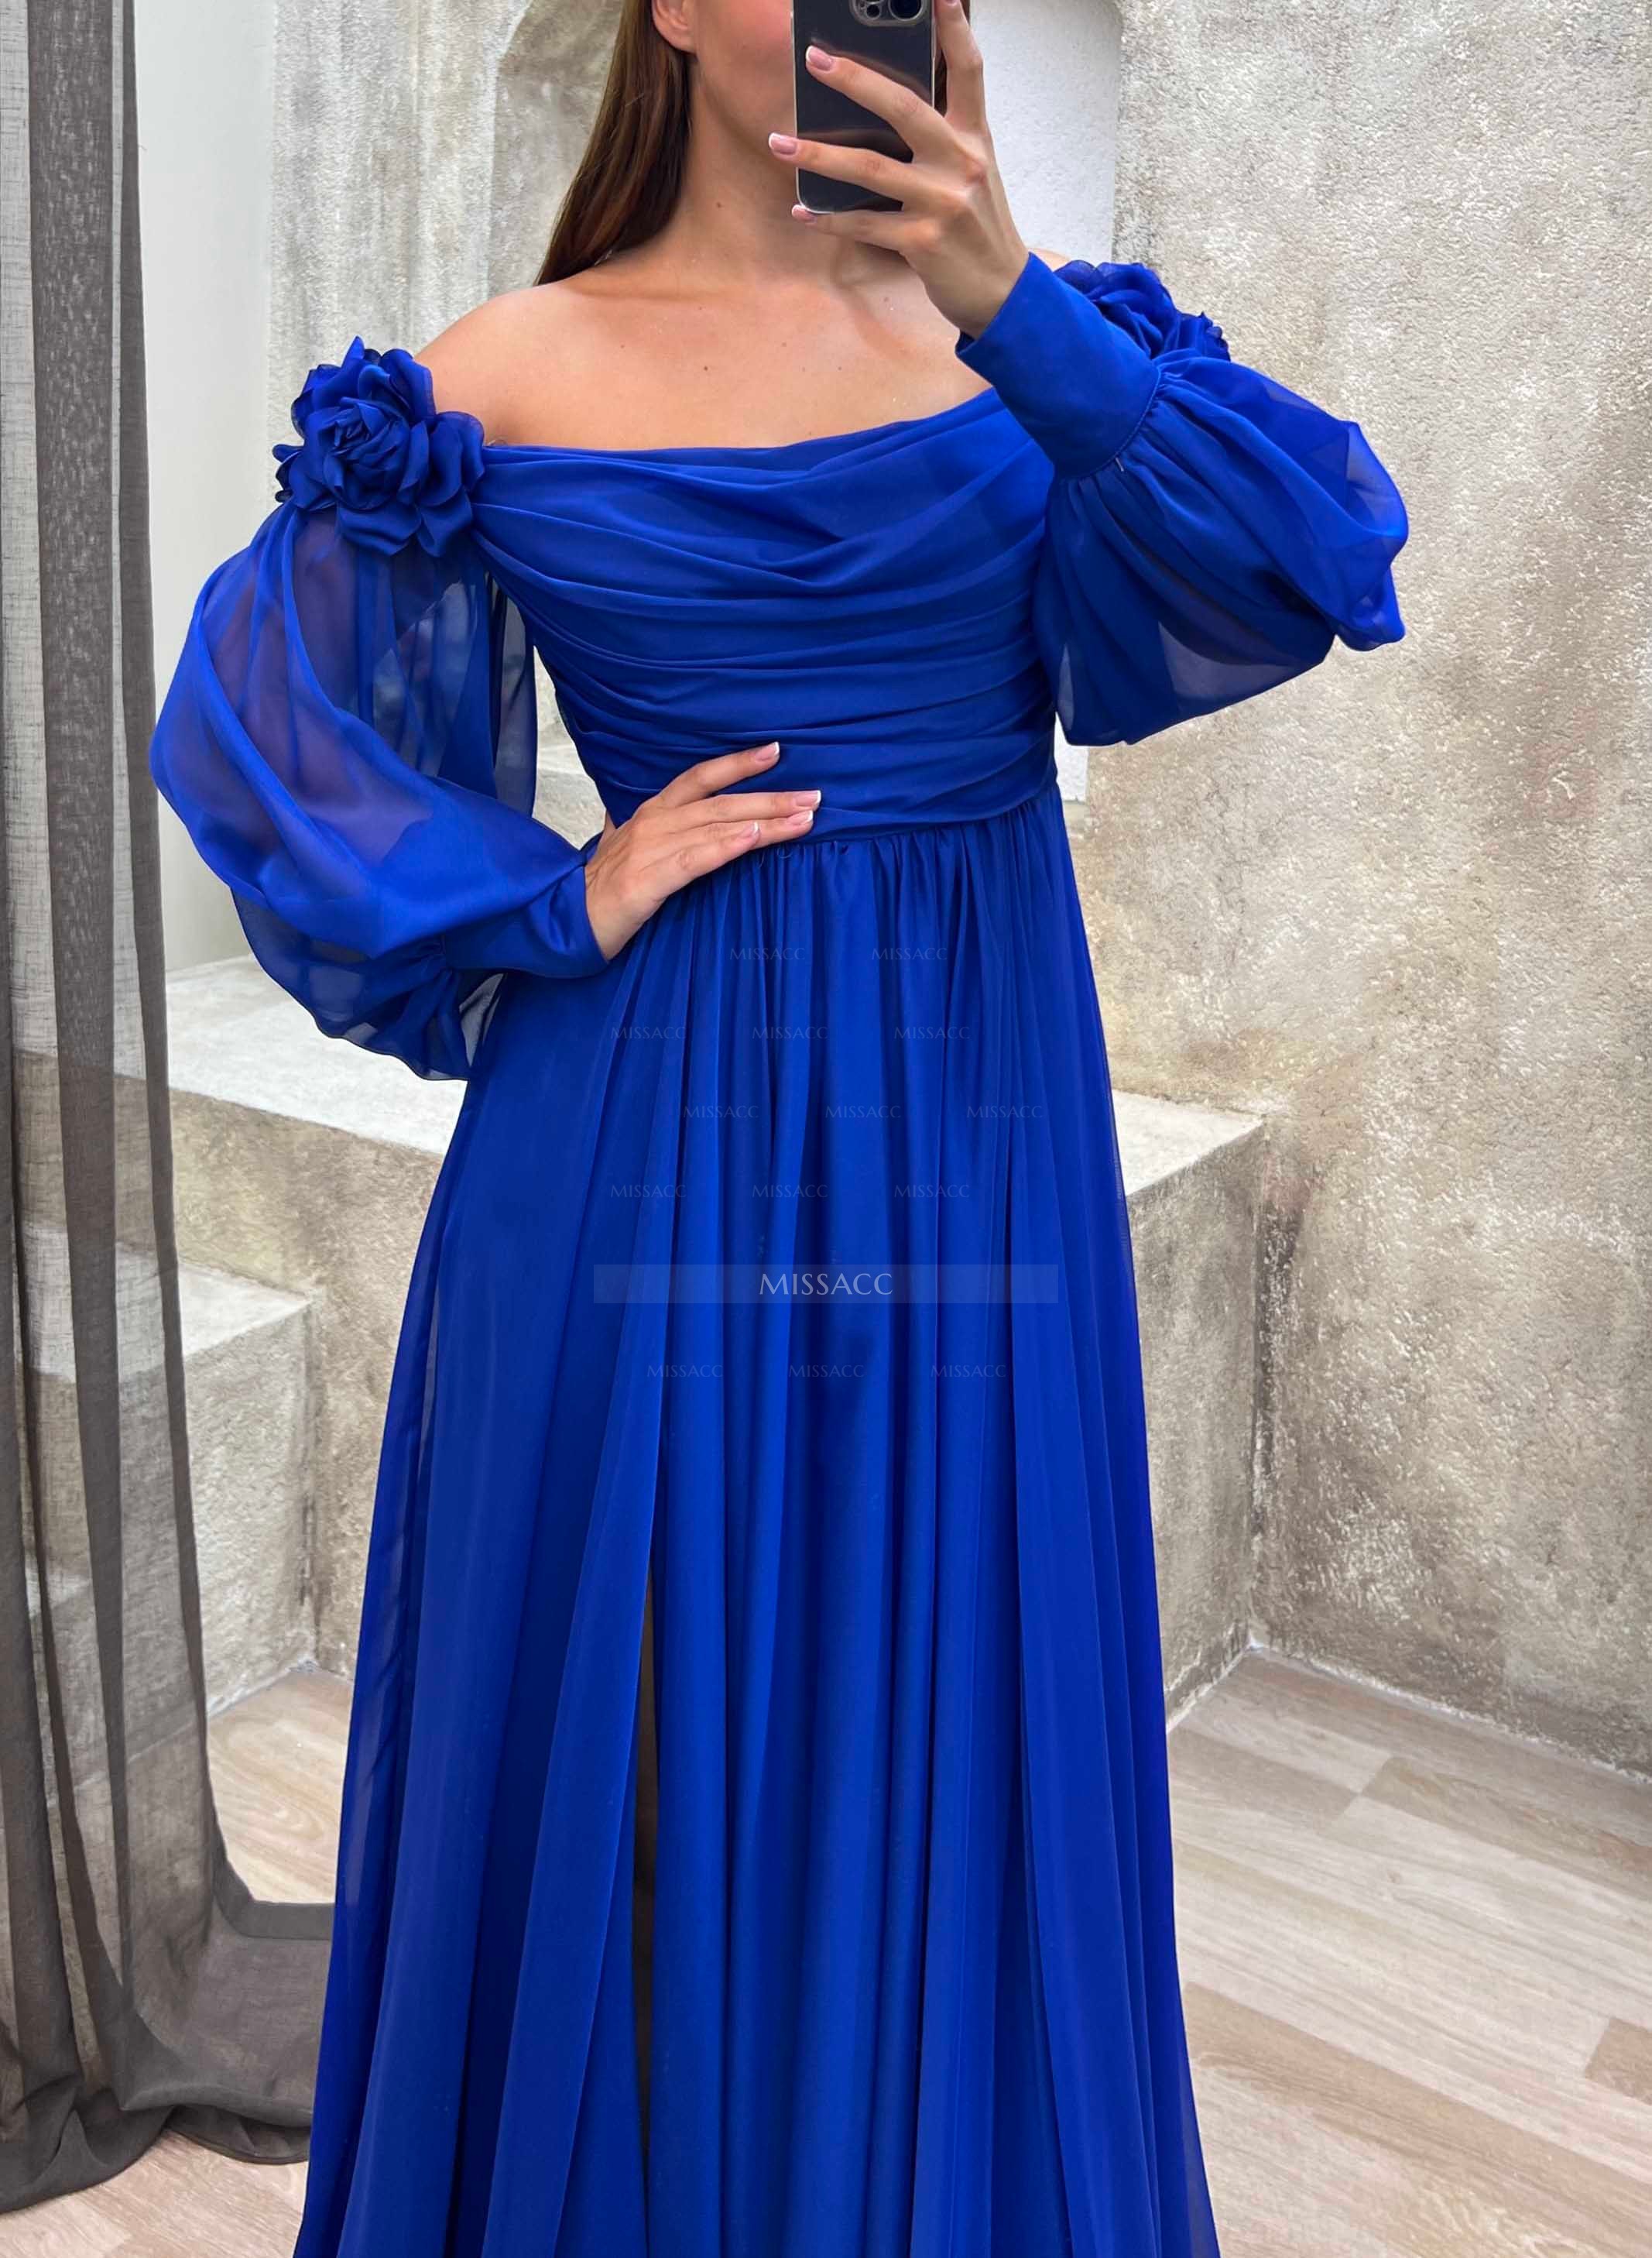 Off-The-Shoulder Long Sleeves Flowers Mother Of The Bride Dresses With Chiffon